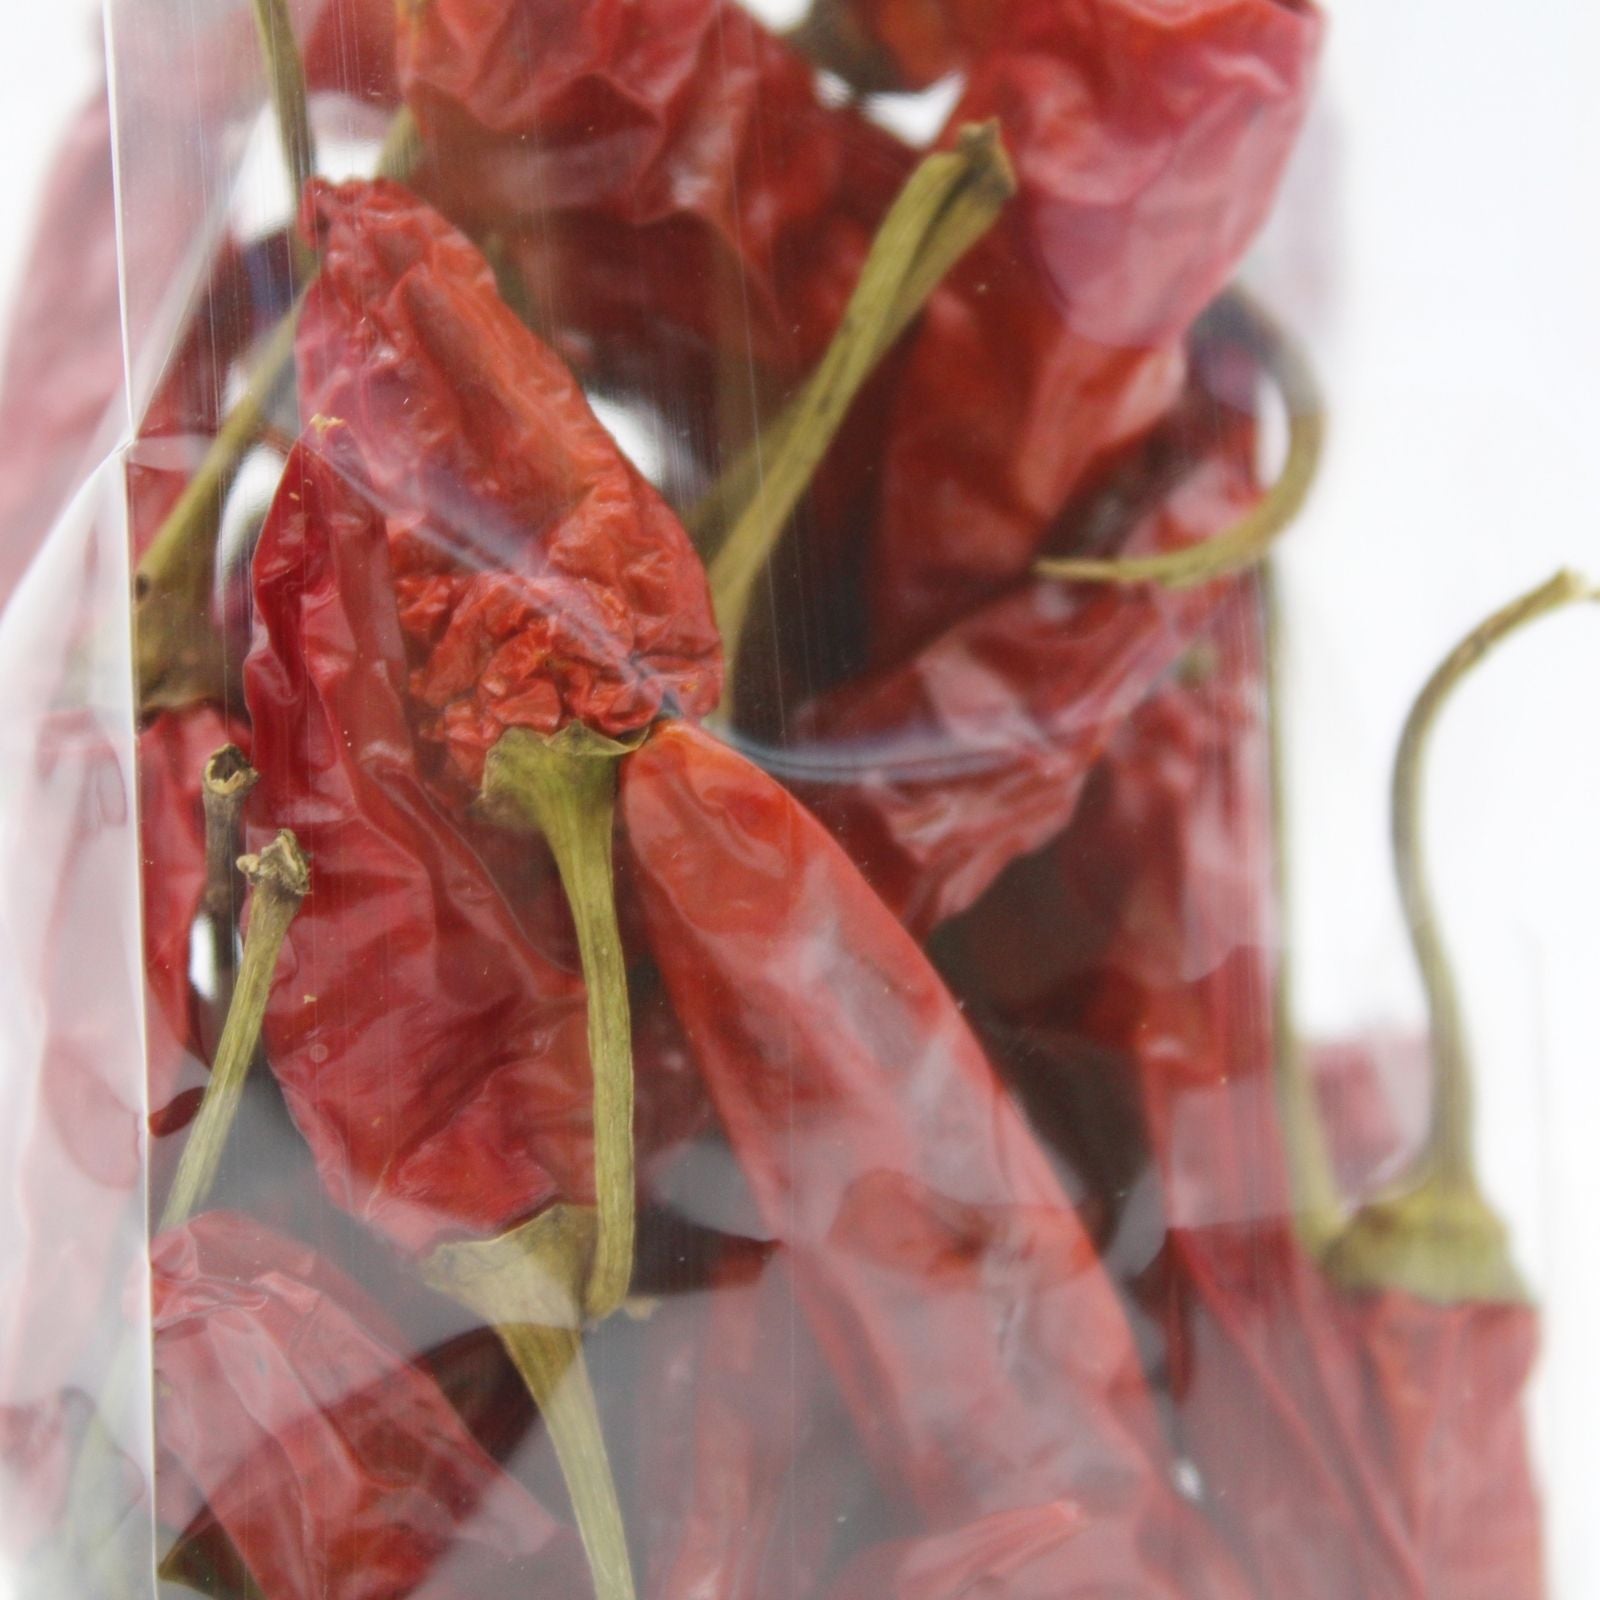 Dried Whole Calabrian Chili Peppers by Tutto Calabria